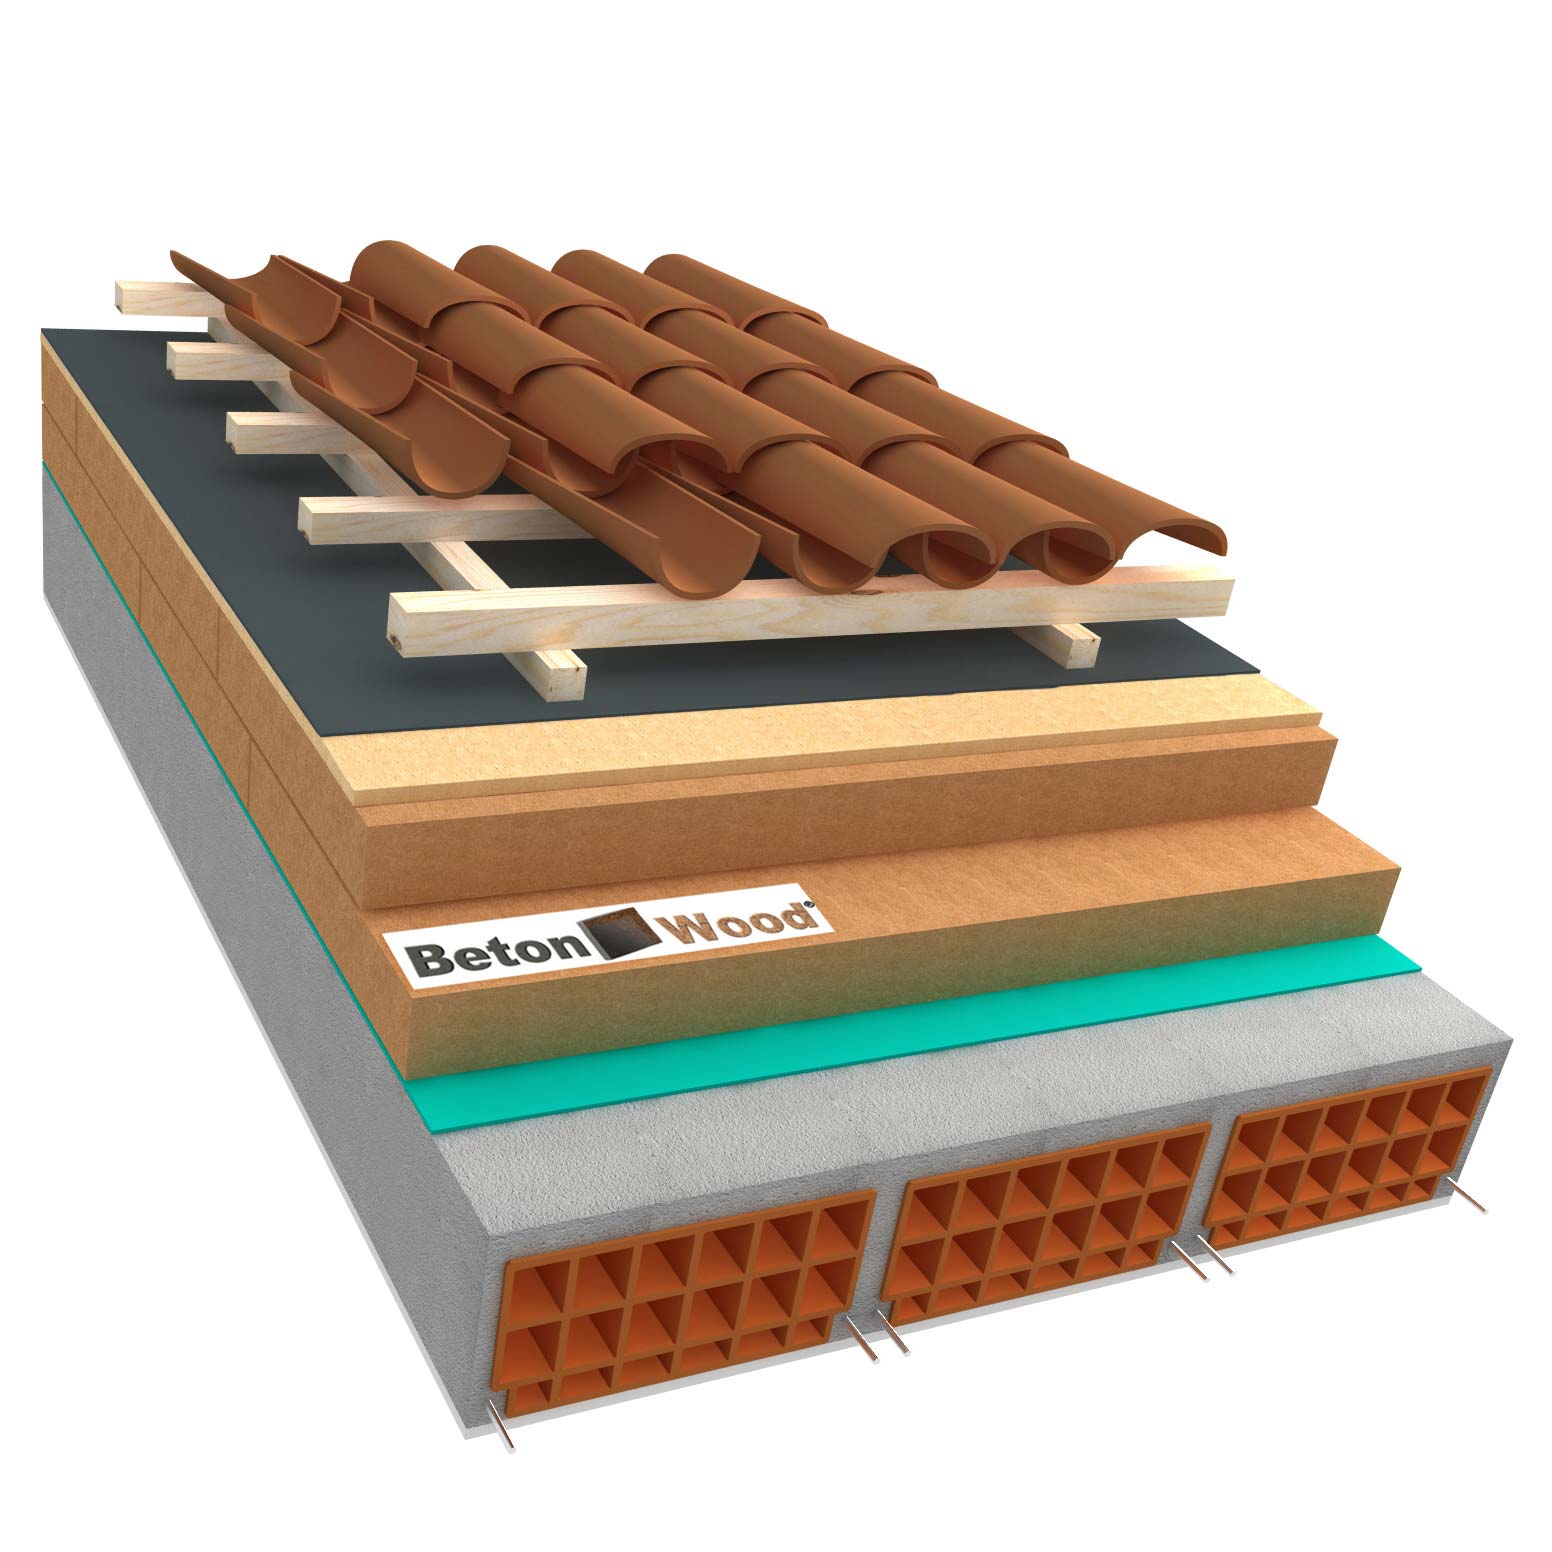 Ventilated roof with wood fiber Isorel and Universal dry on concrete